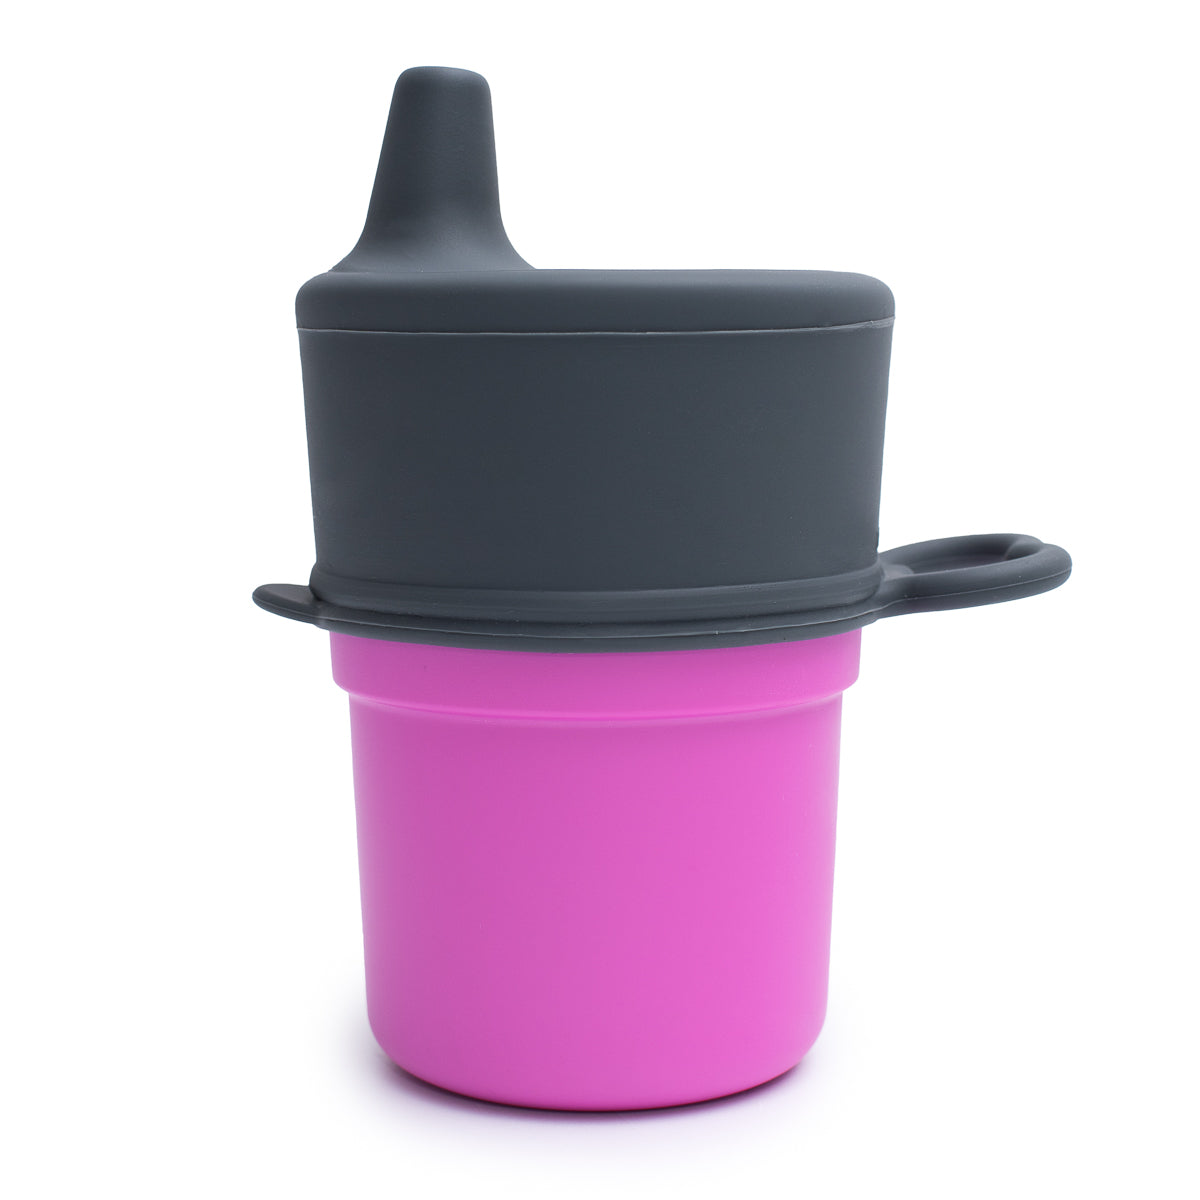 bobo&boo Universal Silicone Sippy Cup Lid